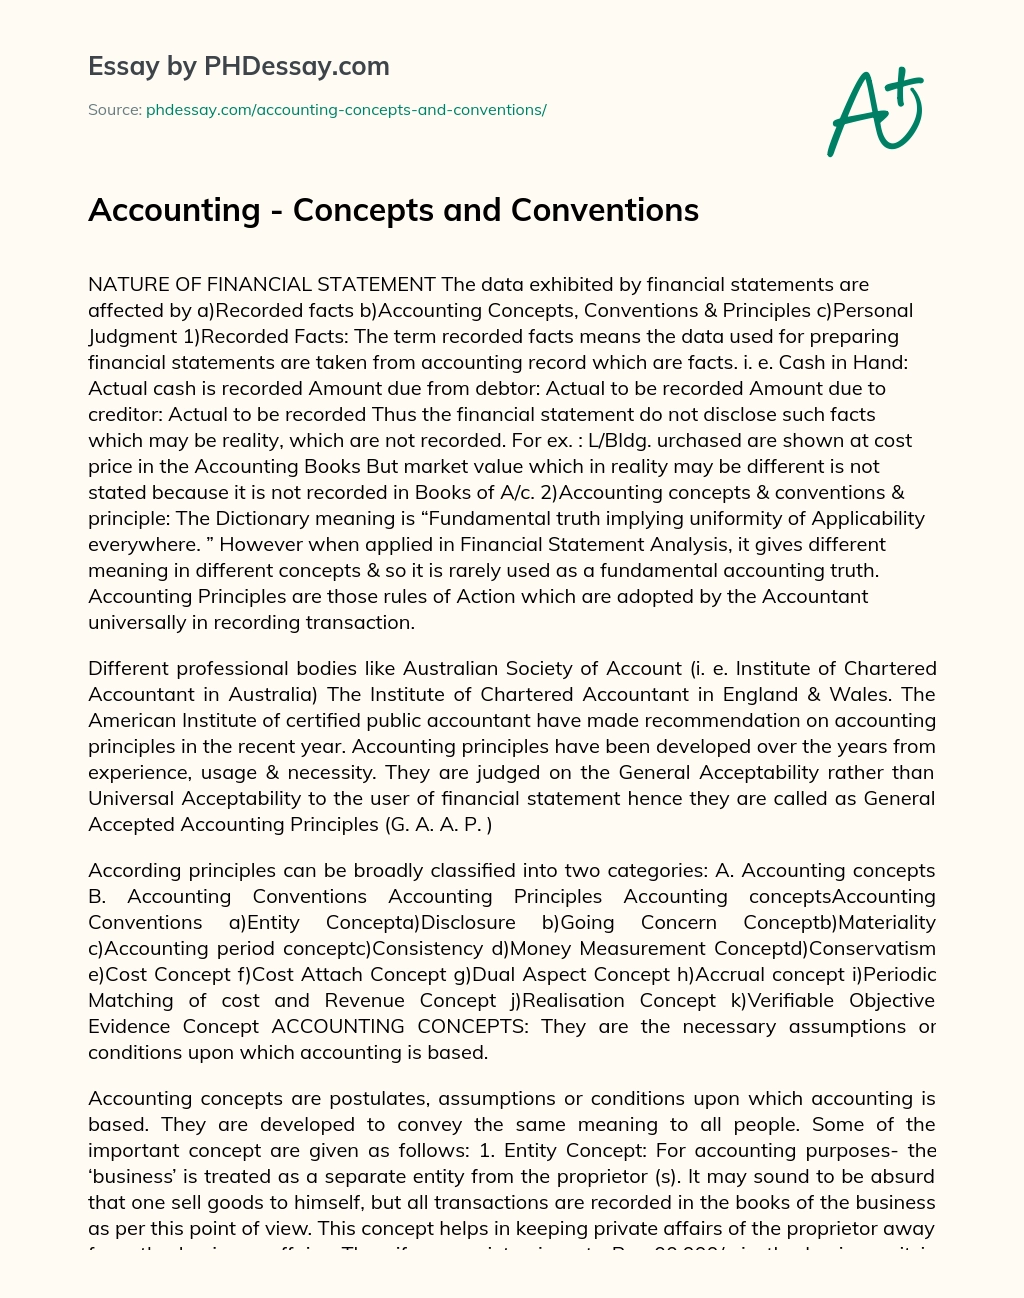 Accounting – Concepts and Conventions essay